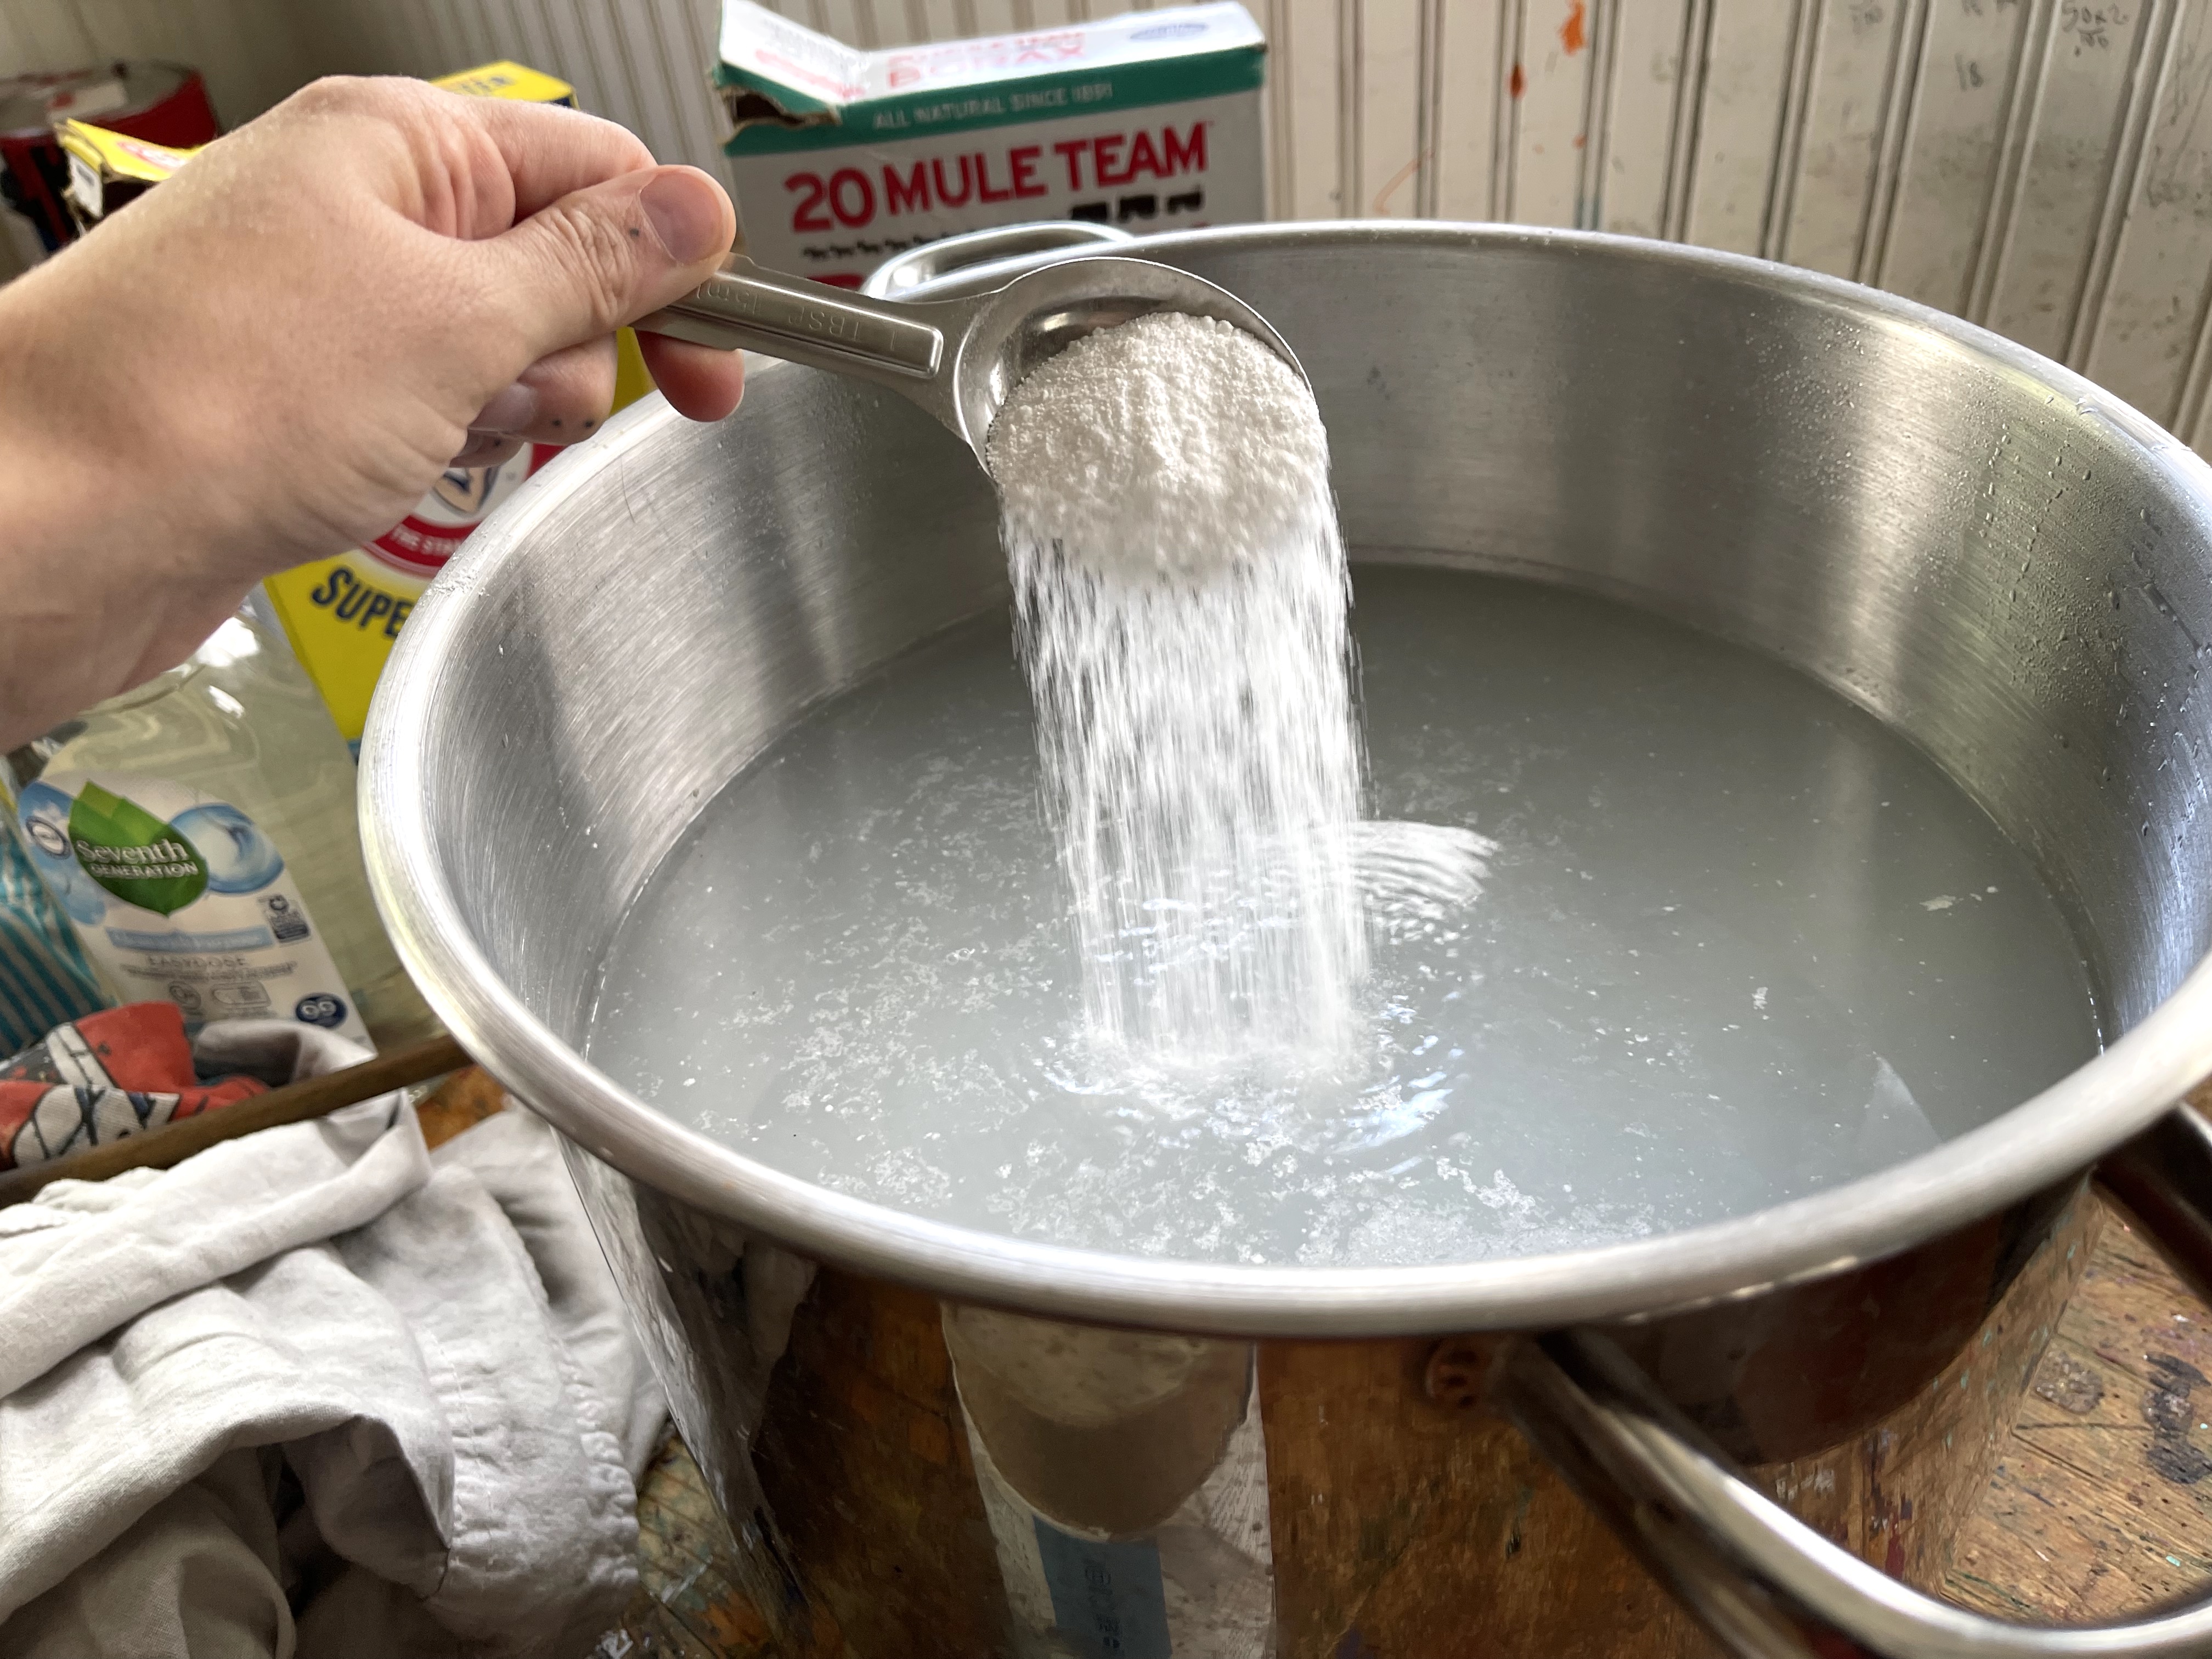 a large pot filled with water being prepared for laundry stripping.